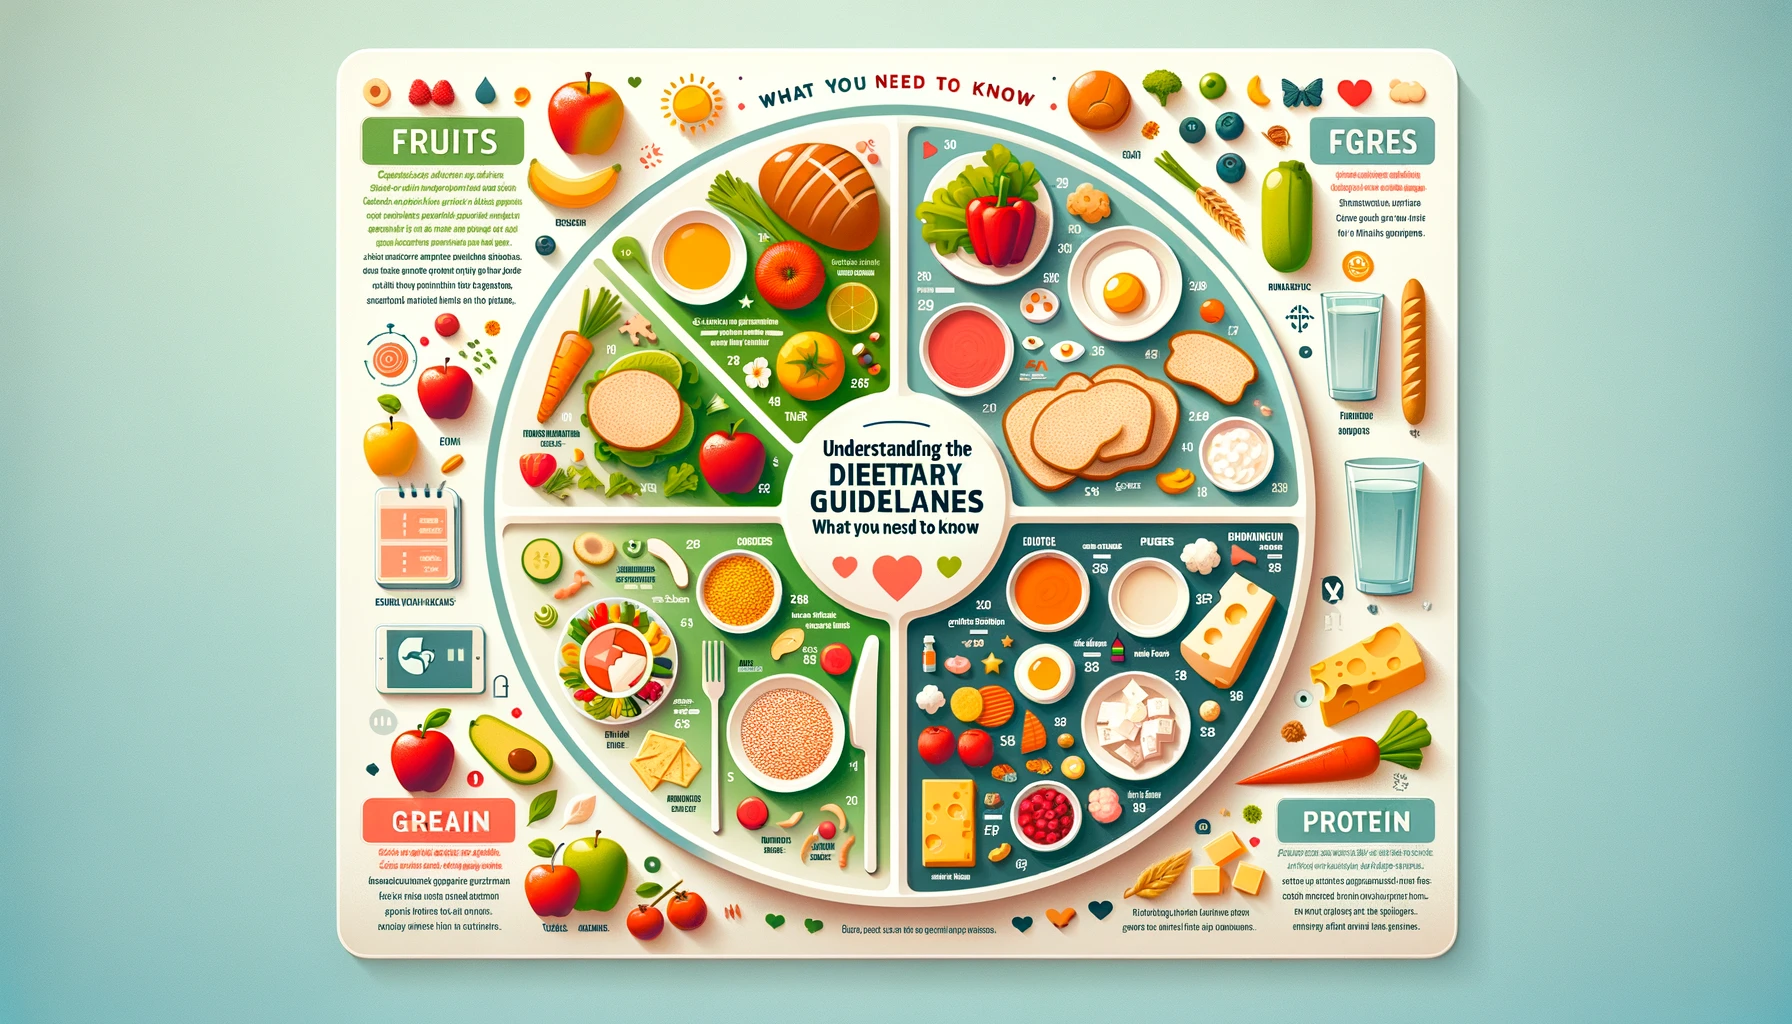 Understanding the Dietary Guidelines: What You Need to Know